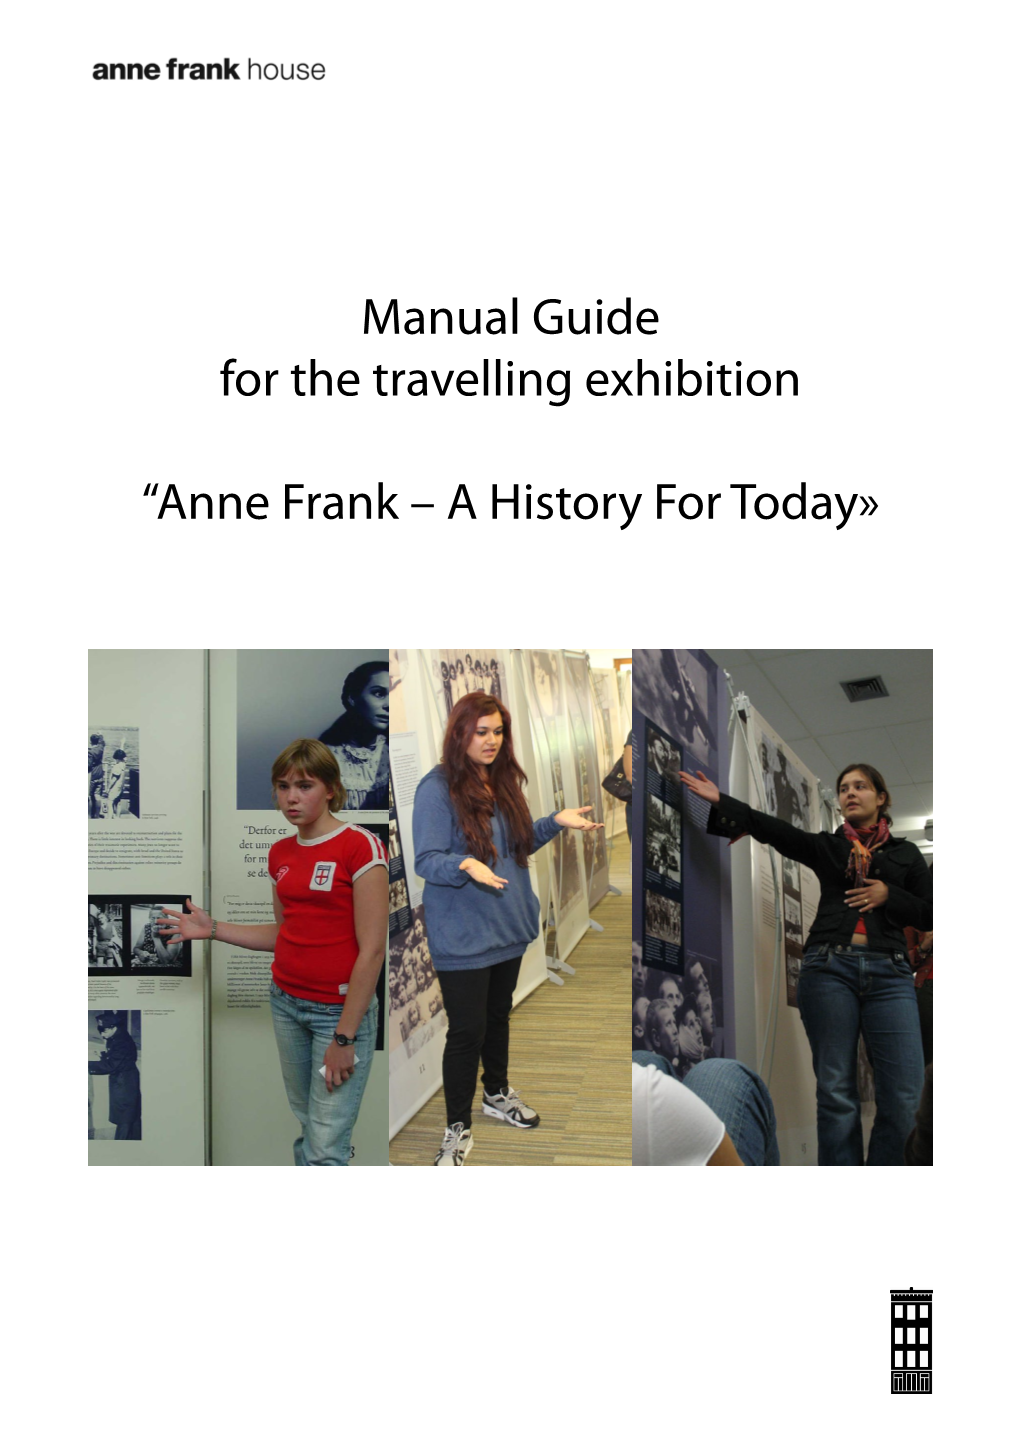 Manual Guide for the Travelling Exhibition